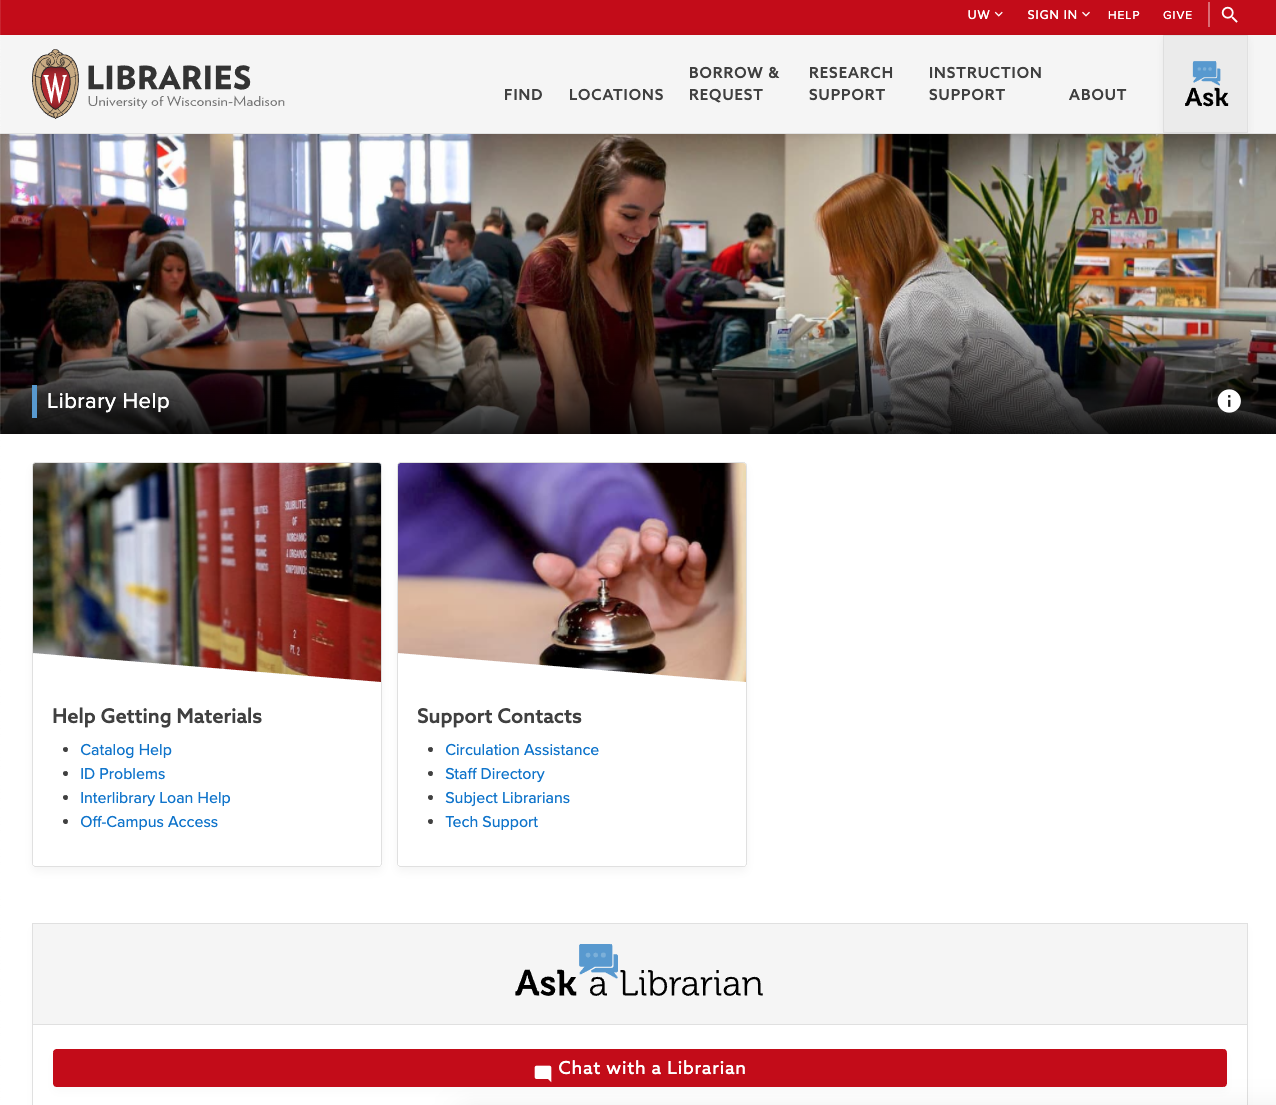 The Libraries help page